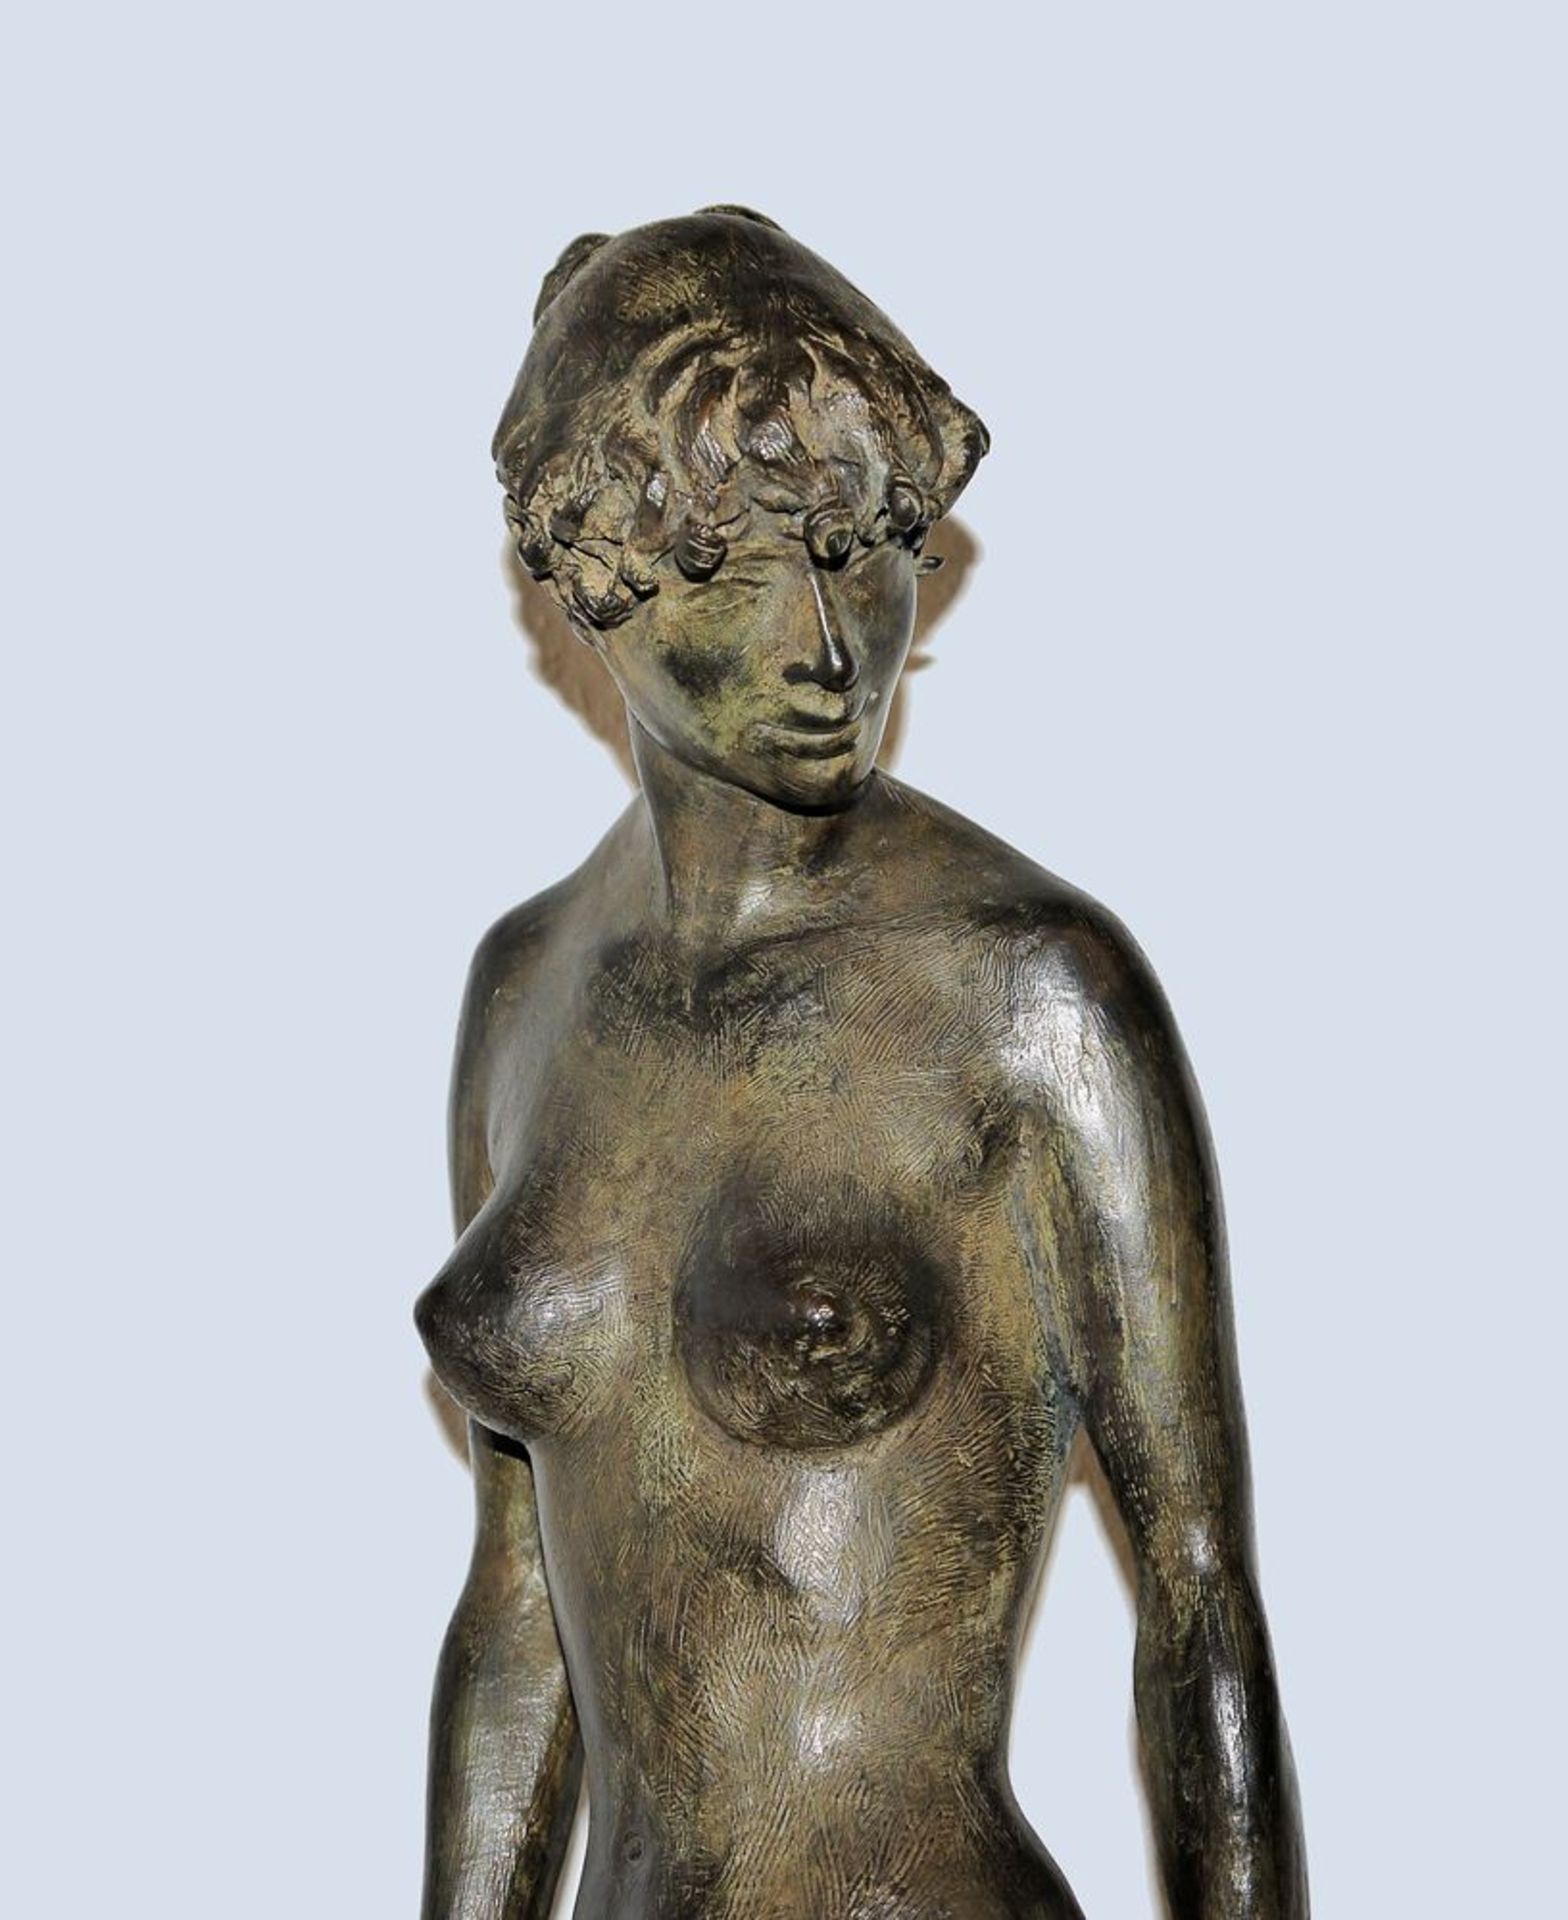 Karl-Heinz Krause, Tedesca Romana, nude, signed bronze from 1987 - Image 4 of 6